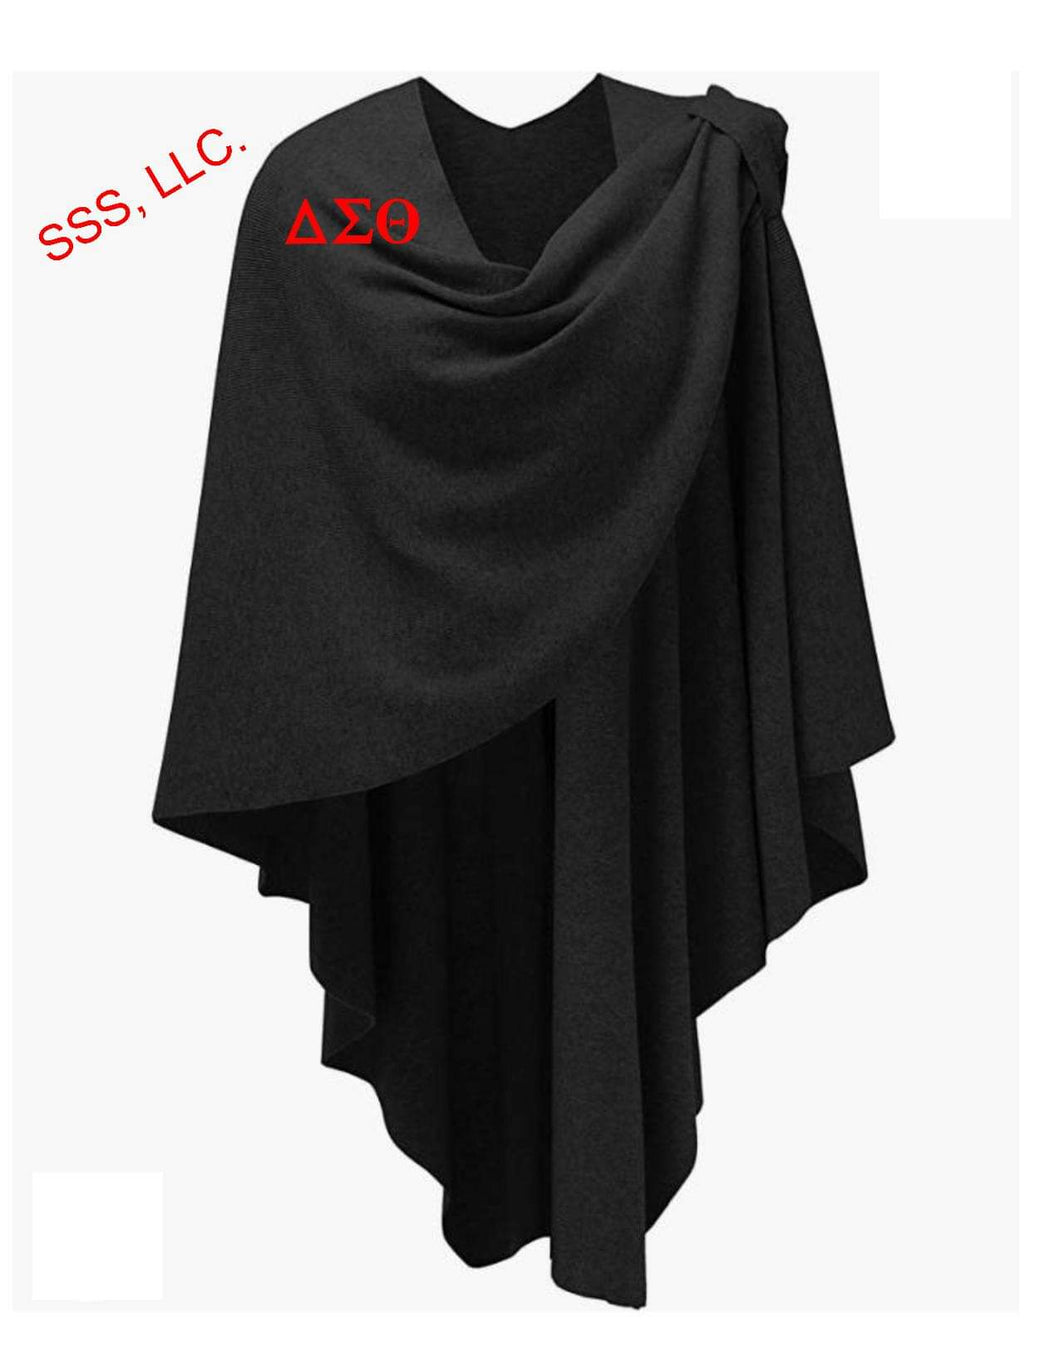 Black Cross Front Poncho Sweater Wrap Topper Knitted Elegant Shawl Cape with DST letters